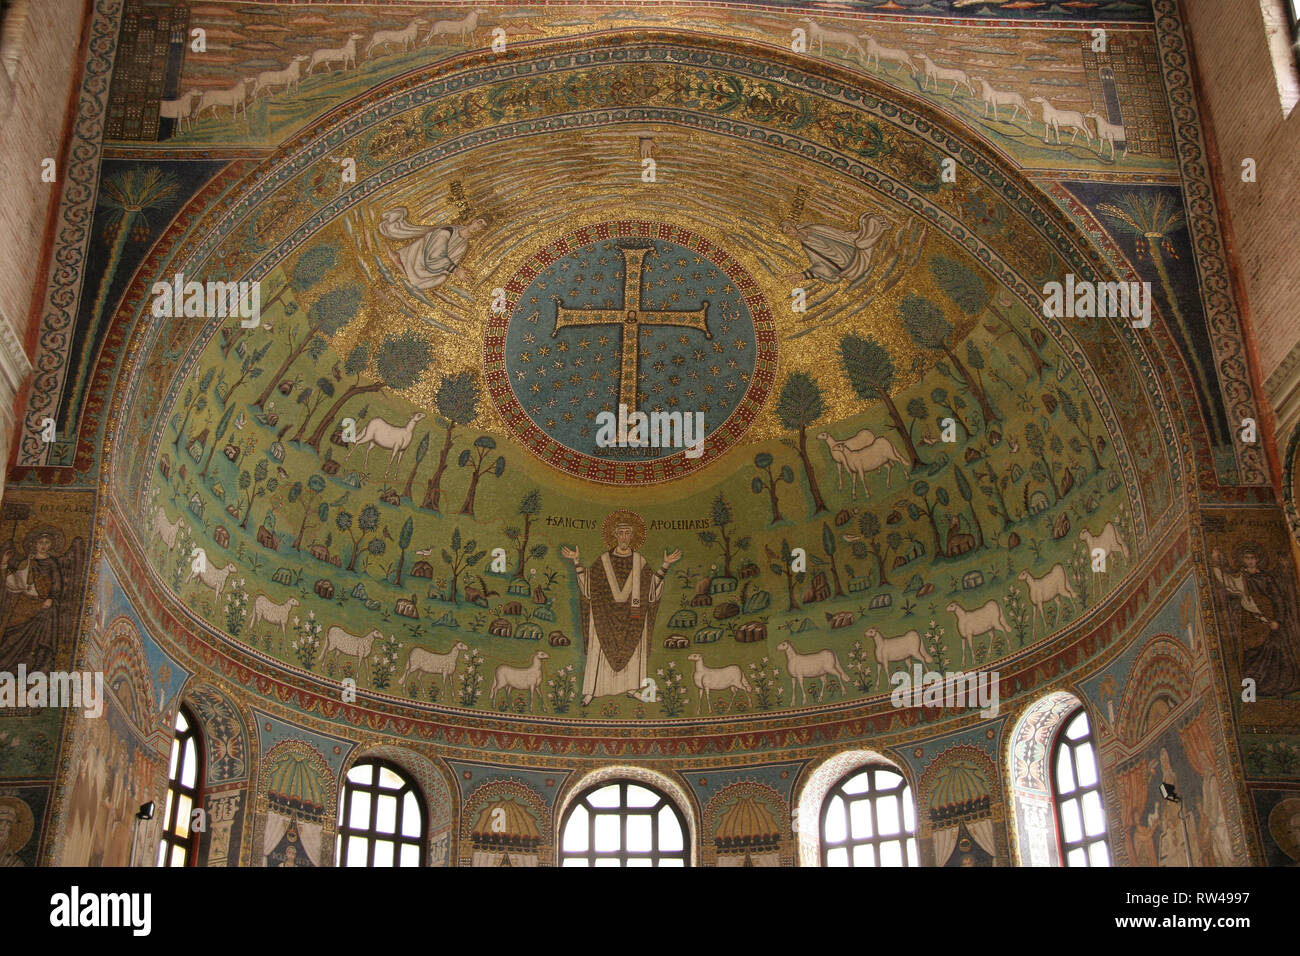 Italy. Ravenna. Basilica of Sant'Apollinare in Classe. Byzantine style. 6th CE. Apse with mosaics. Stock Photo